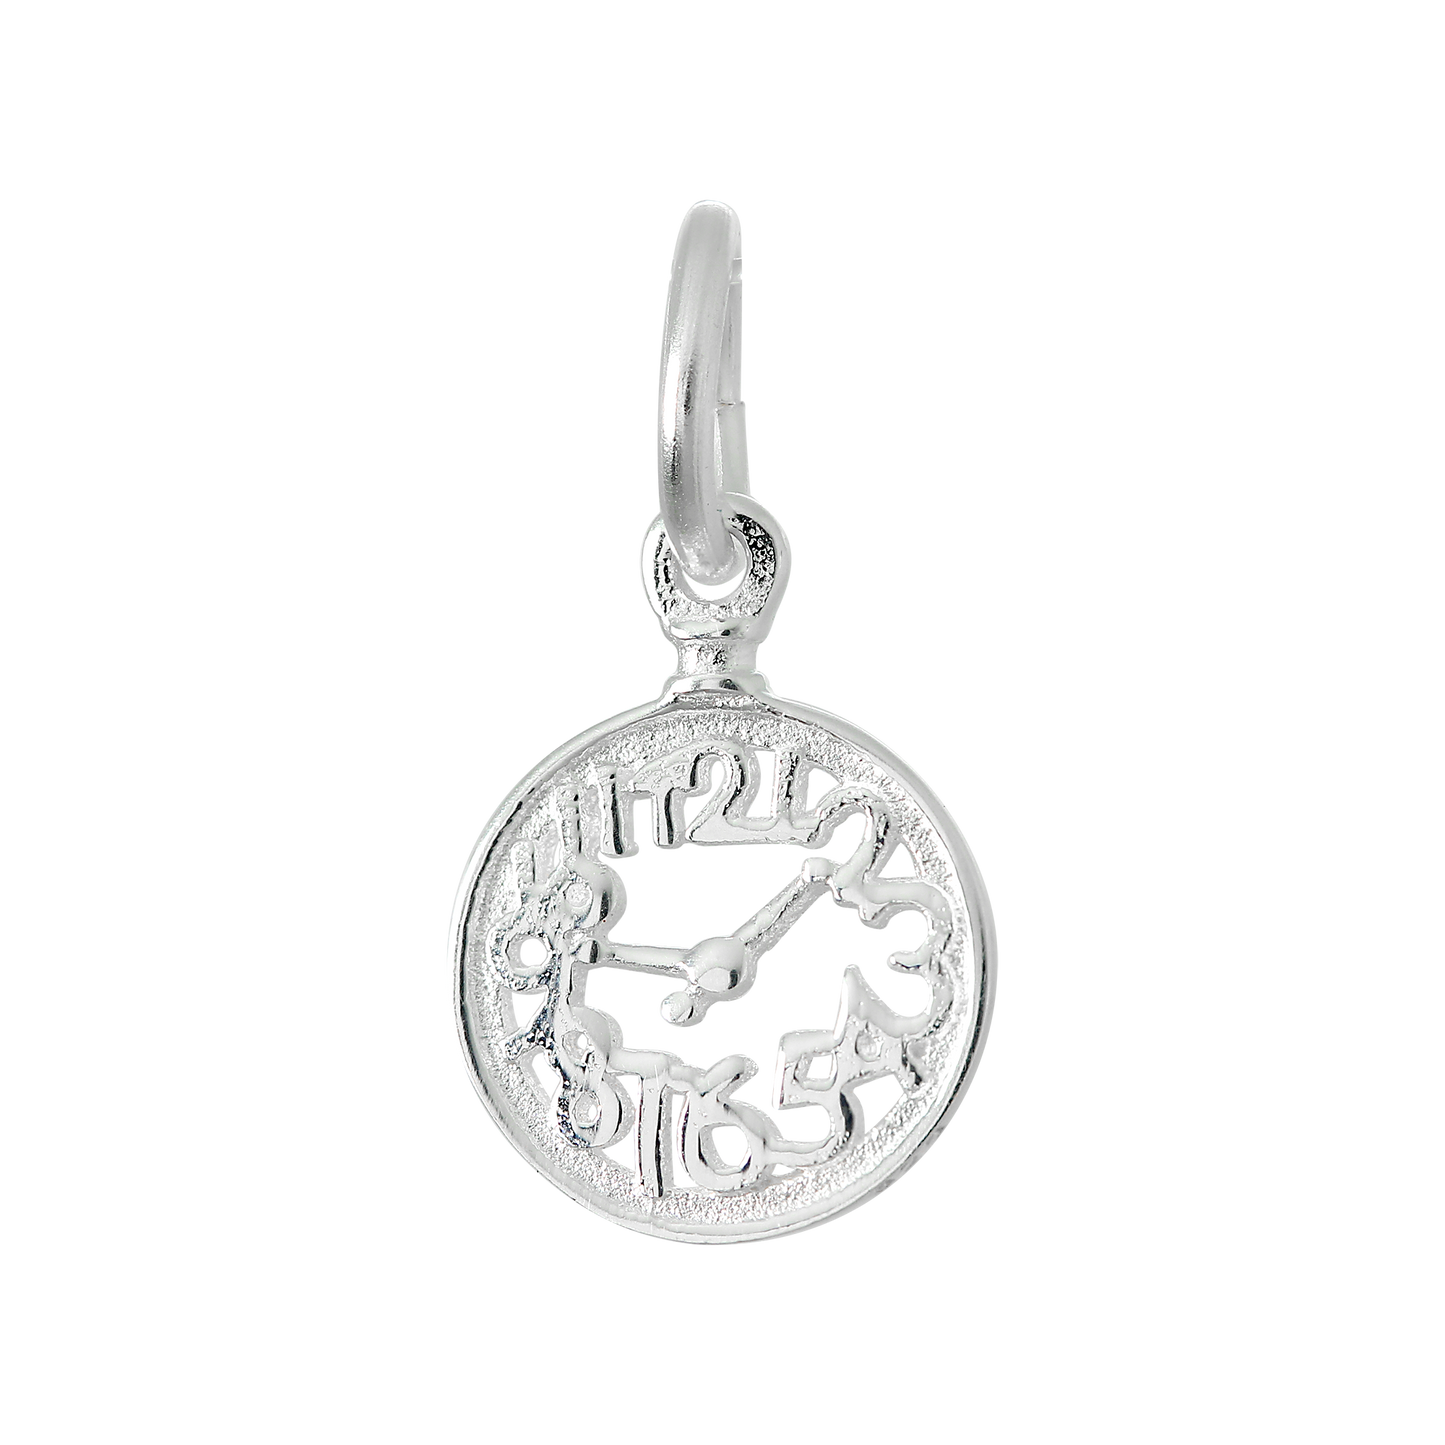 Small Sterling Silver Alice in Wonderland Clock Face Charm